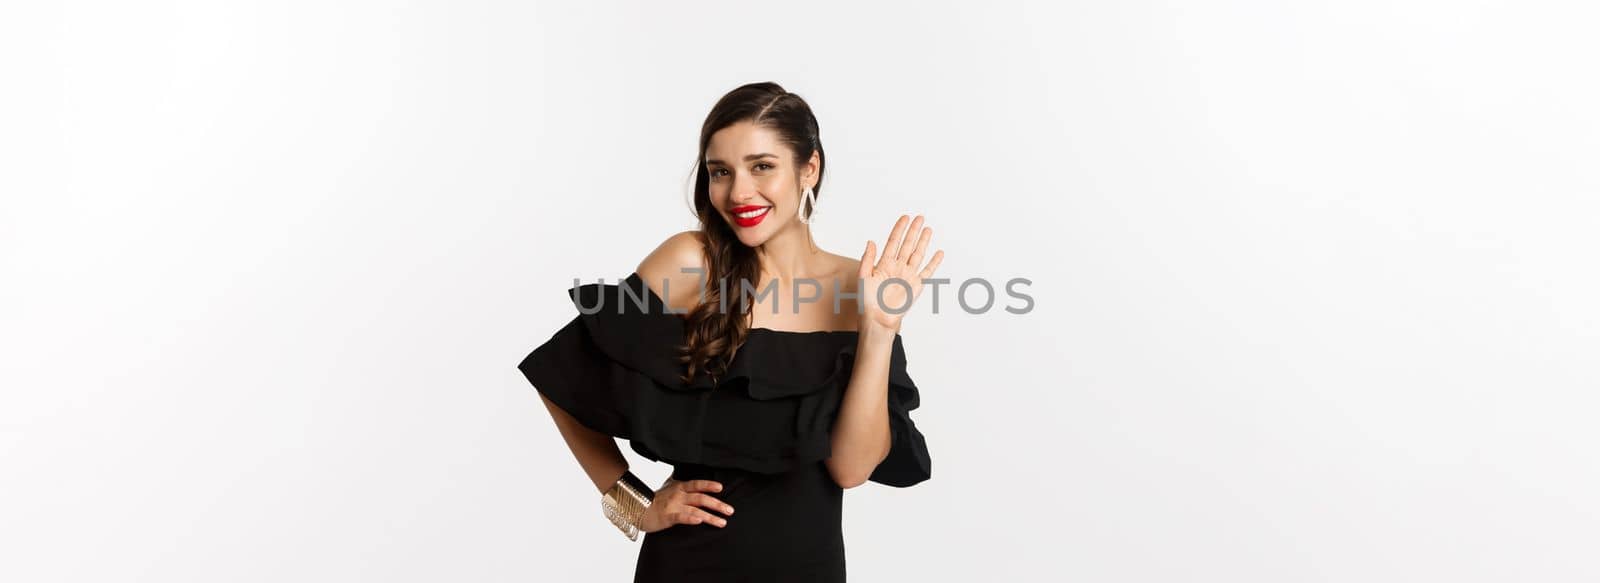 Gorgeous young woman in black dress, earrings and jewelry, waving hand and smiling friendly, saying hello, standing over white background.